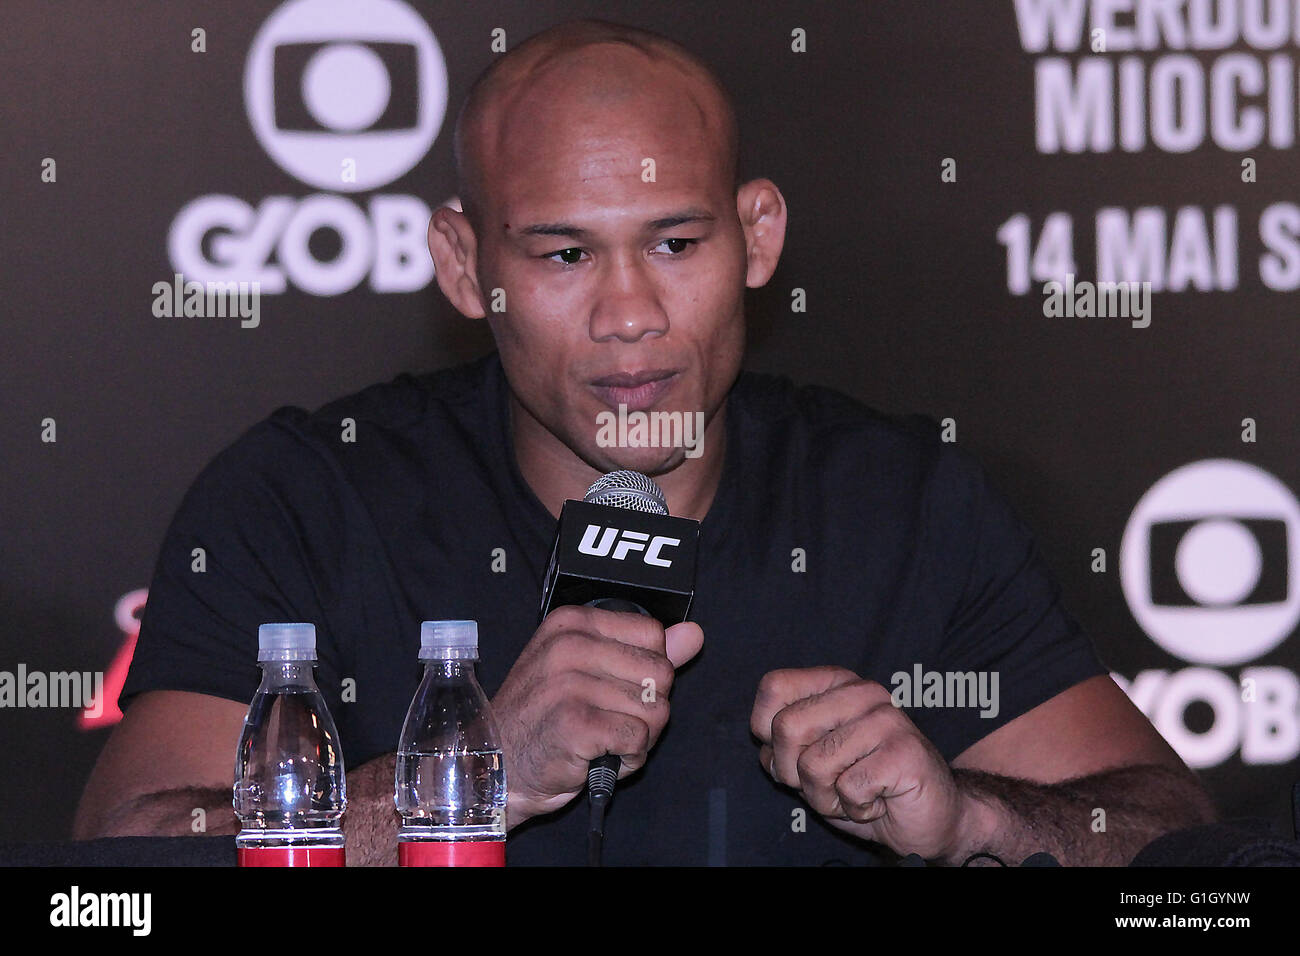 CURITIBA, PR - 05/14/2016: UFC 198 IN CURITIBA - Ronaldo Jacare at the press conference after the fights of UFC 198. Alligator defeated Vitor Belfort in combat by category average weight. (Photo: William Artigas / FotoArena) Stock Photo